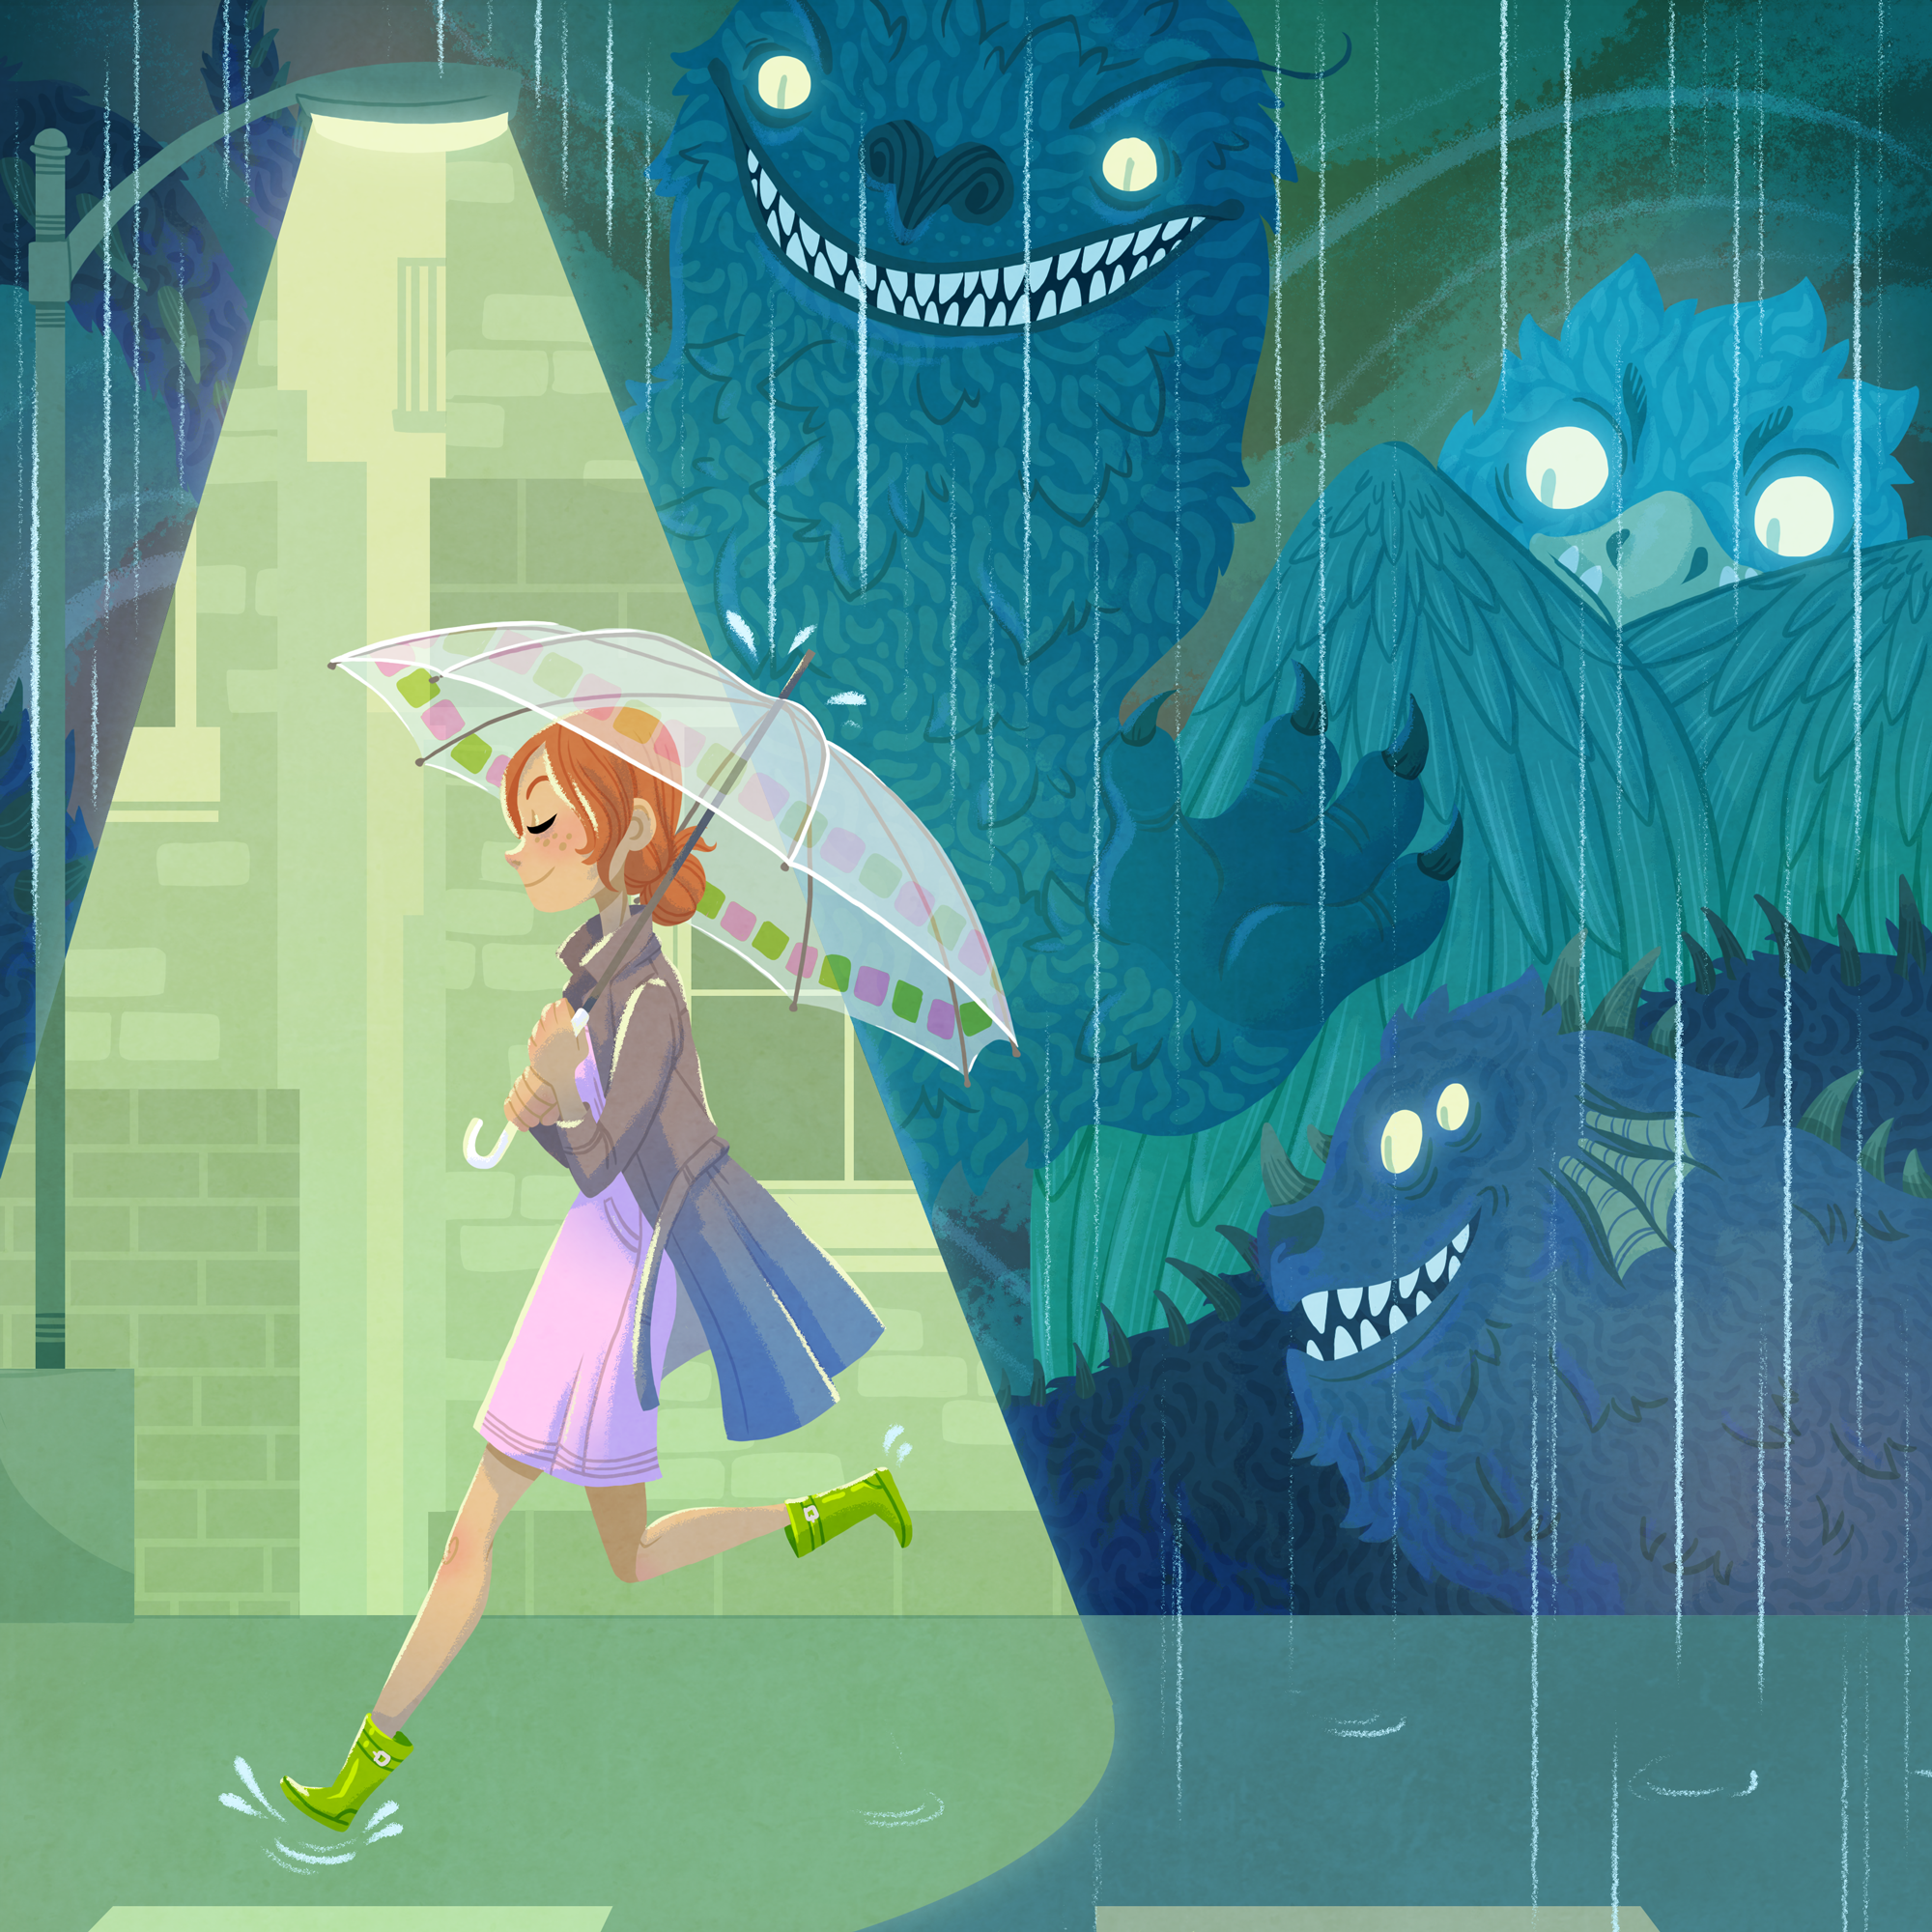 An illustration of a red headed female walking happily through the rain with an umbrella, in the background three monsters lurk within the greenery.